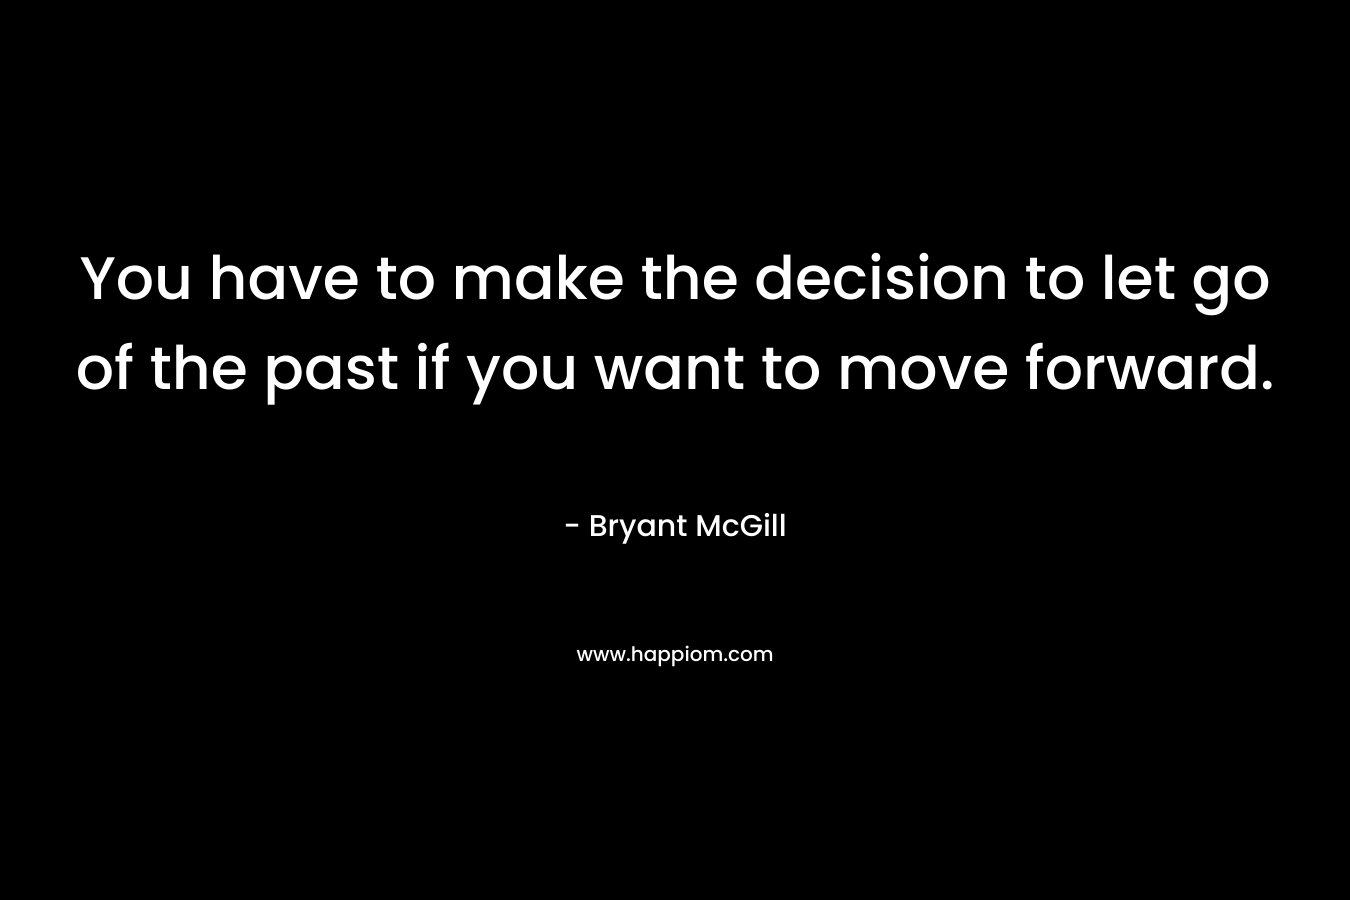 You have to make the decision to let go of the past if you want to move forward.